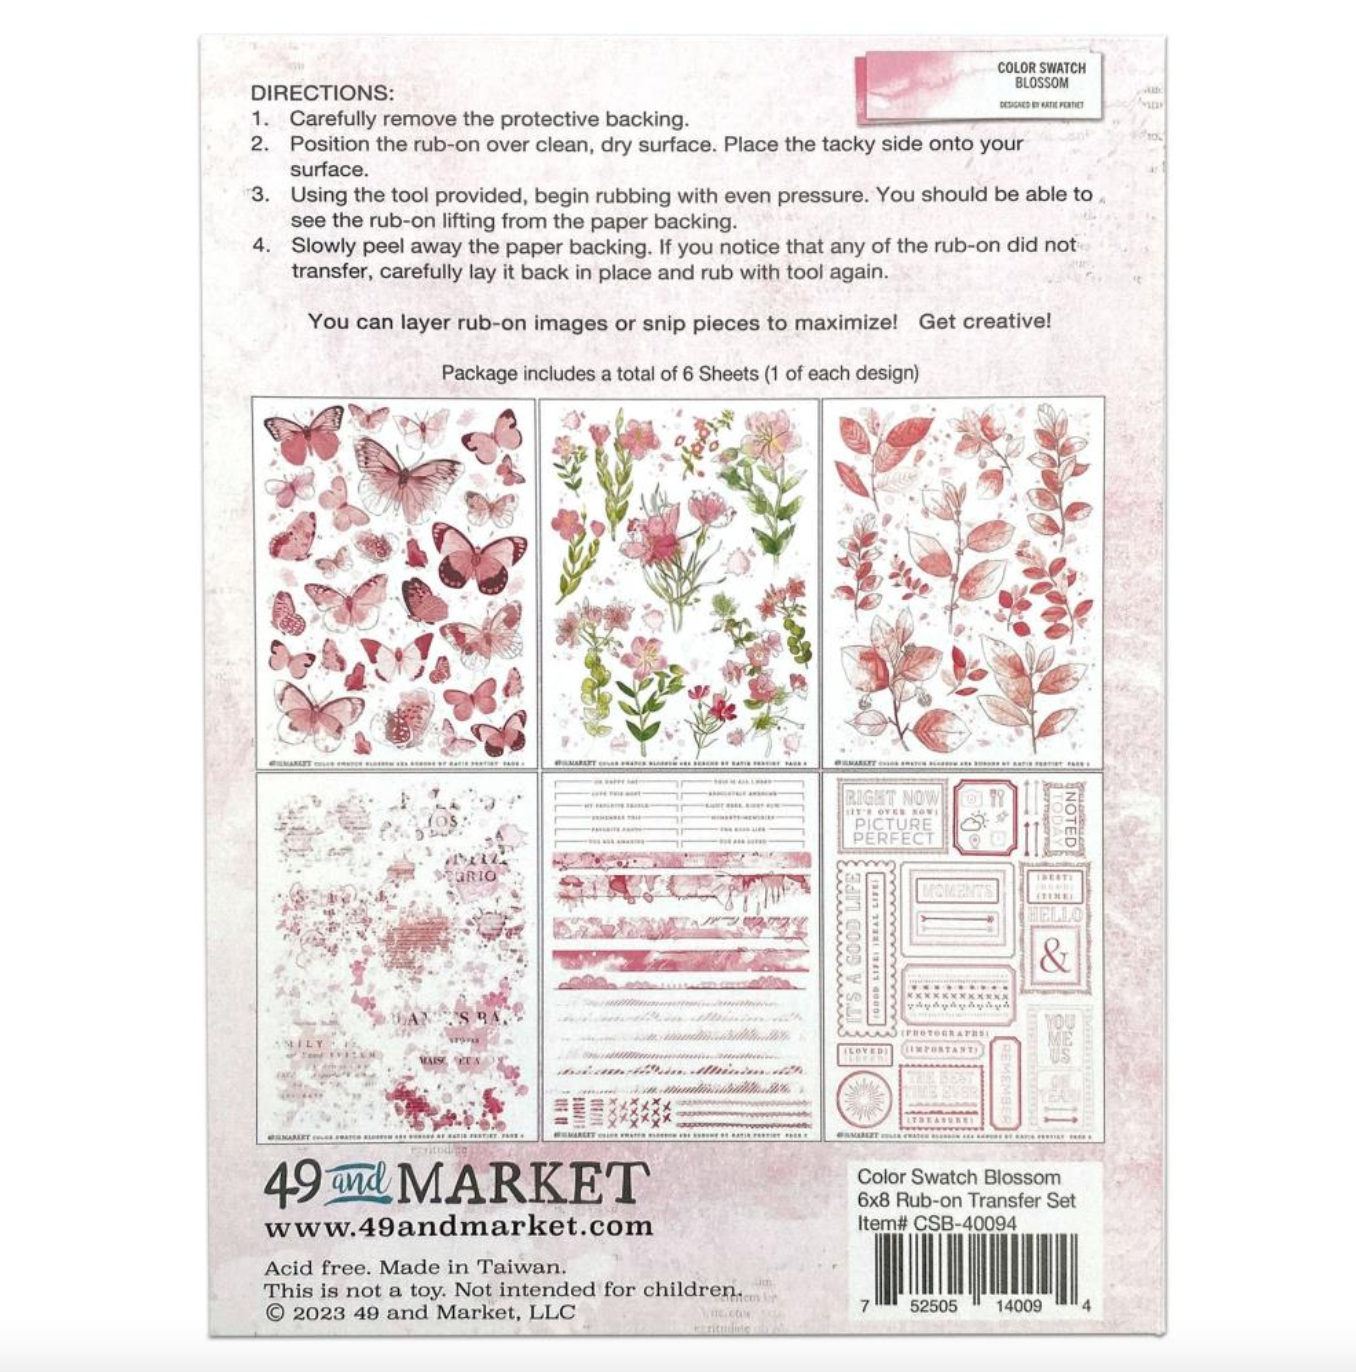 Color Swatch - Blossom Rub-Ons 6x8 - 6 Sheets - 49 and Market